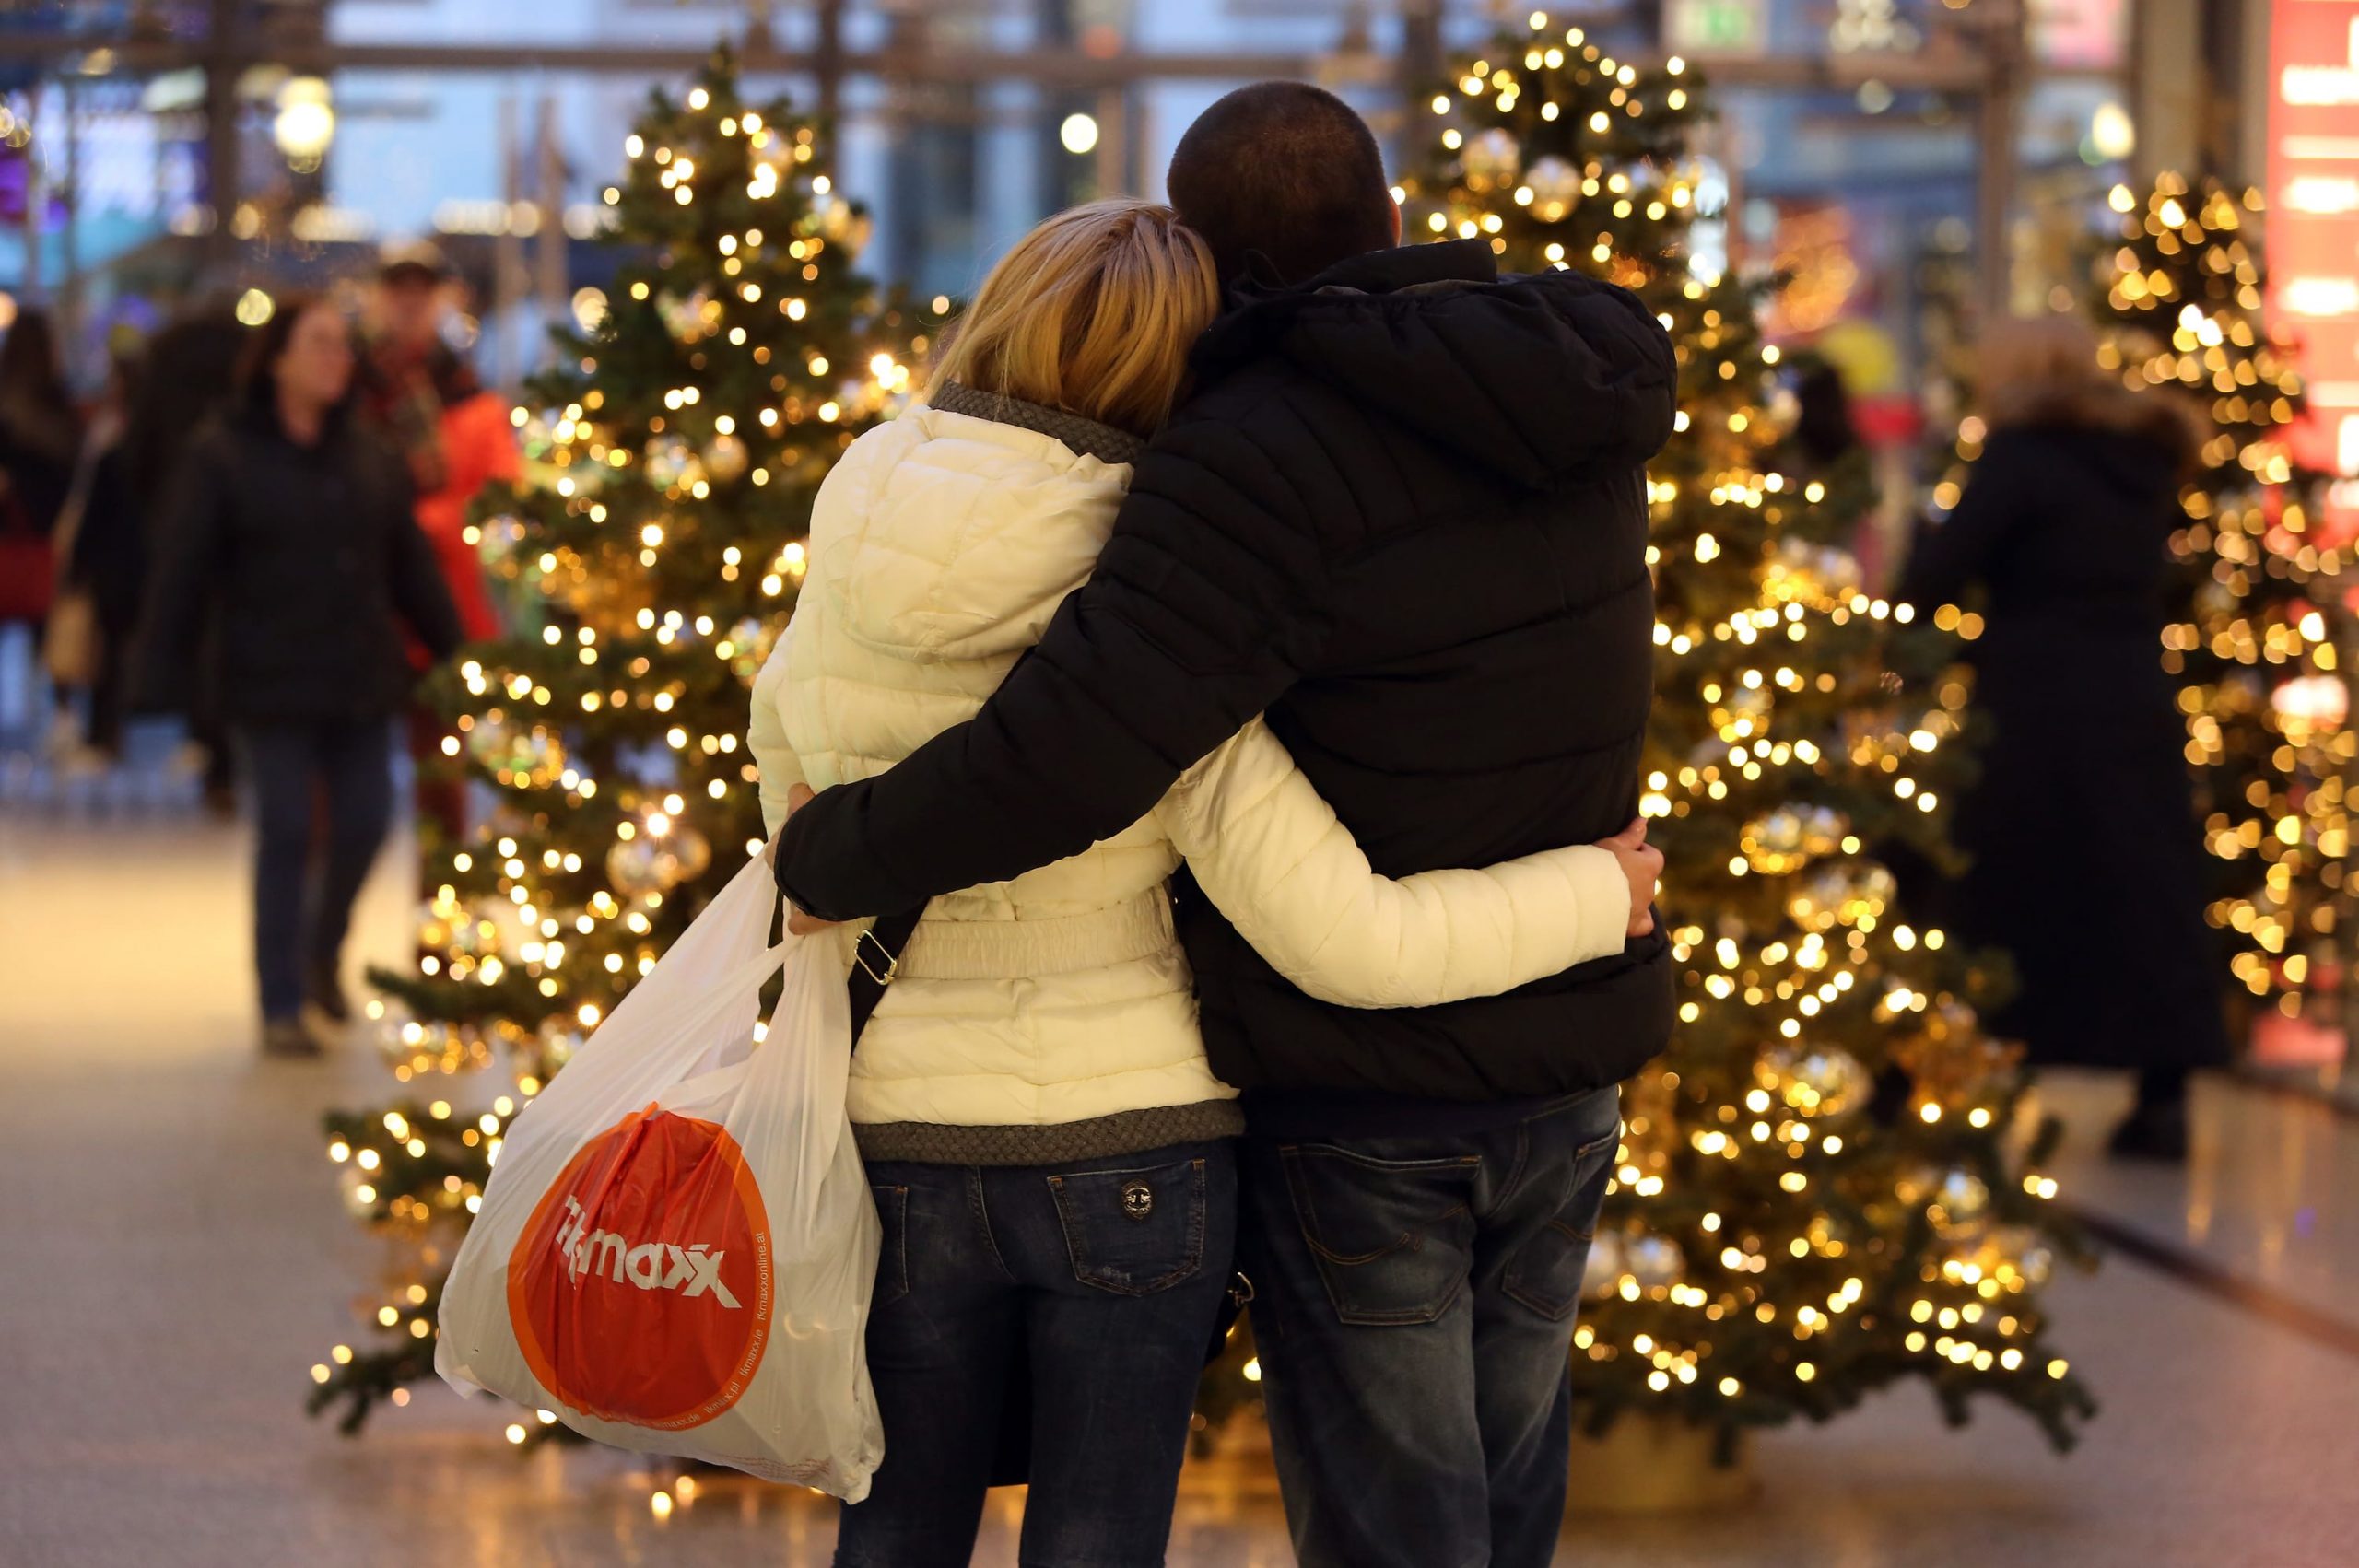 Infected-tired shoppers want a meaningful holiday season